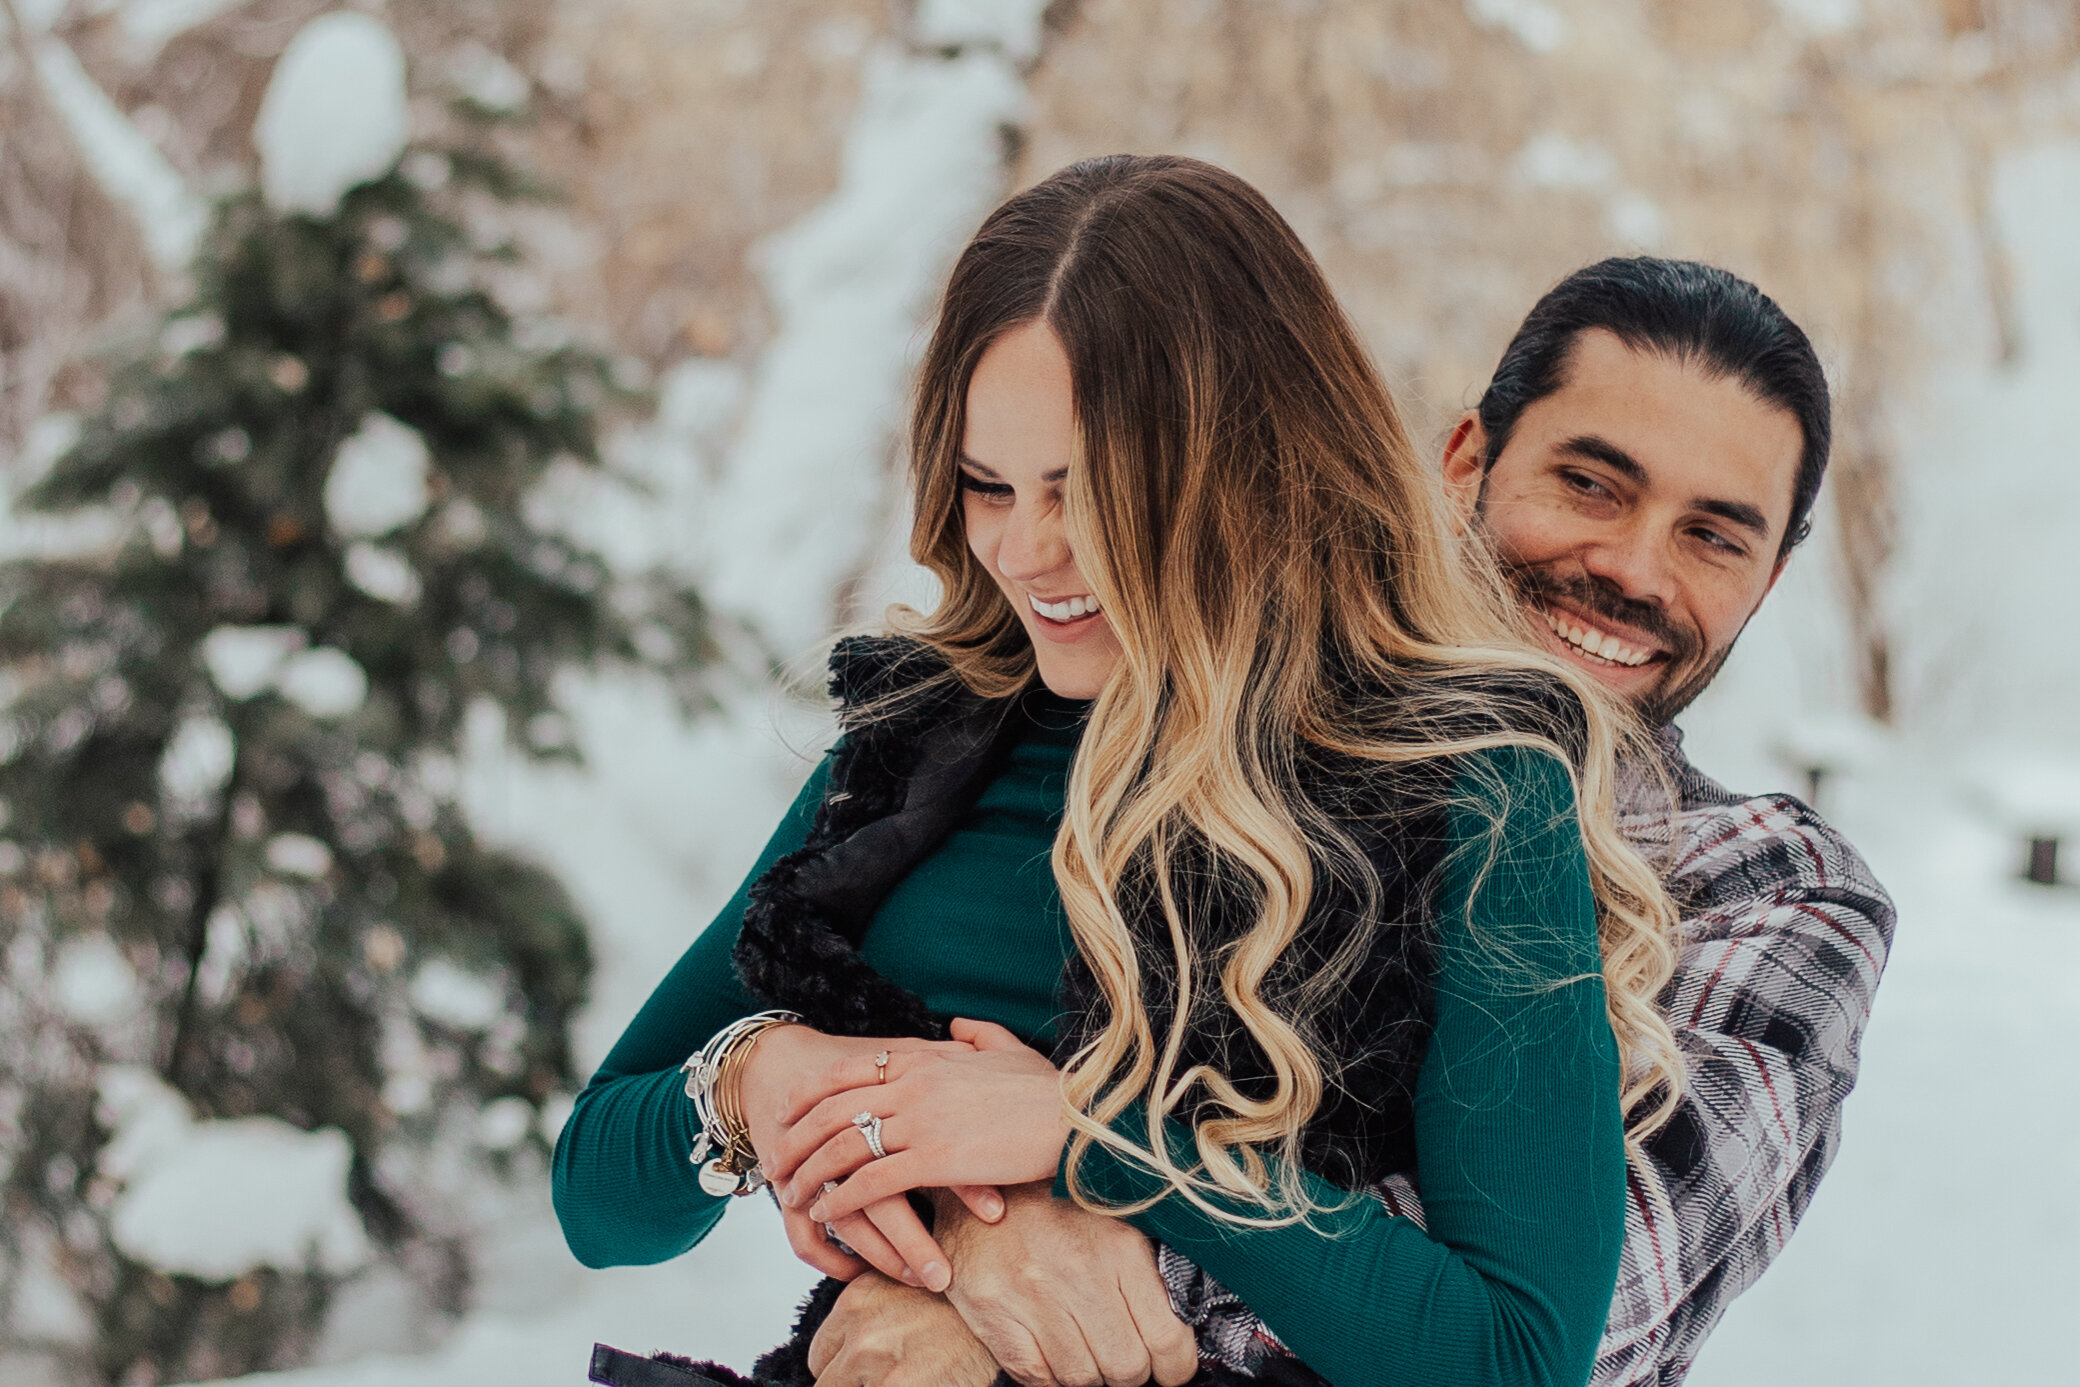 Snowy winter mountain couple anniversary shoot engagement session romantic playful happy #utahphotographer #weddingphotographer #engagements #coupleshoot #engagementsession